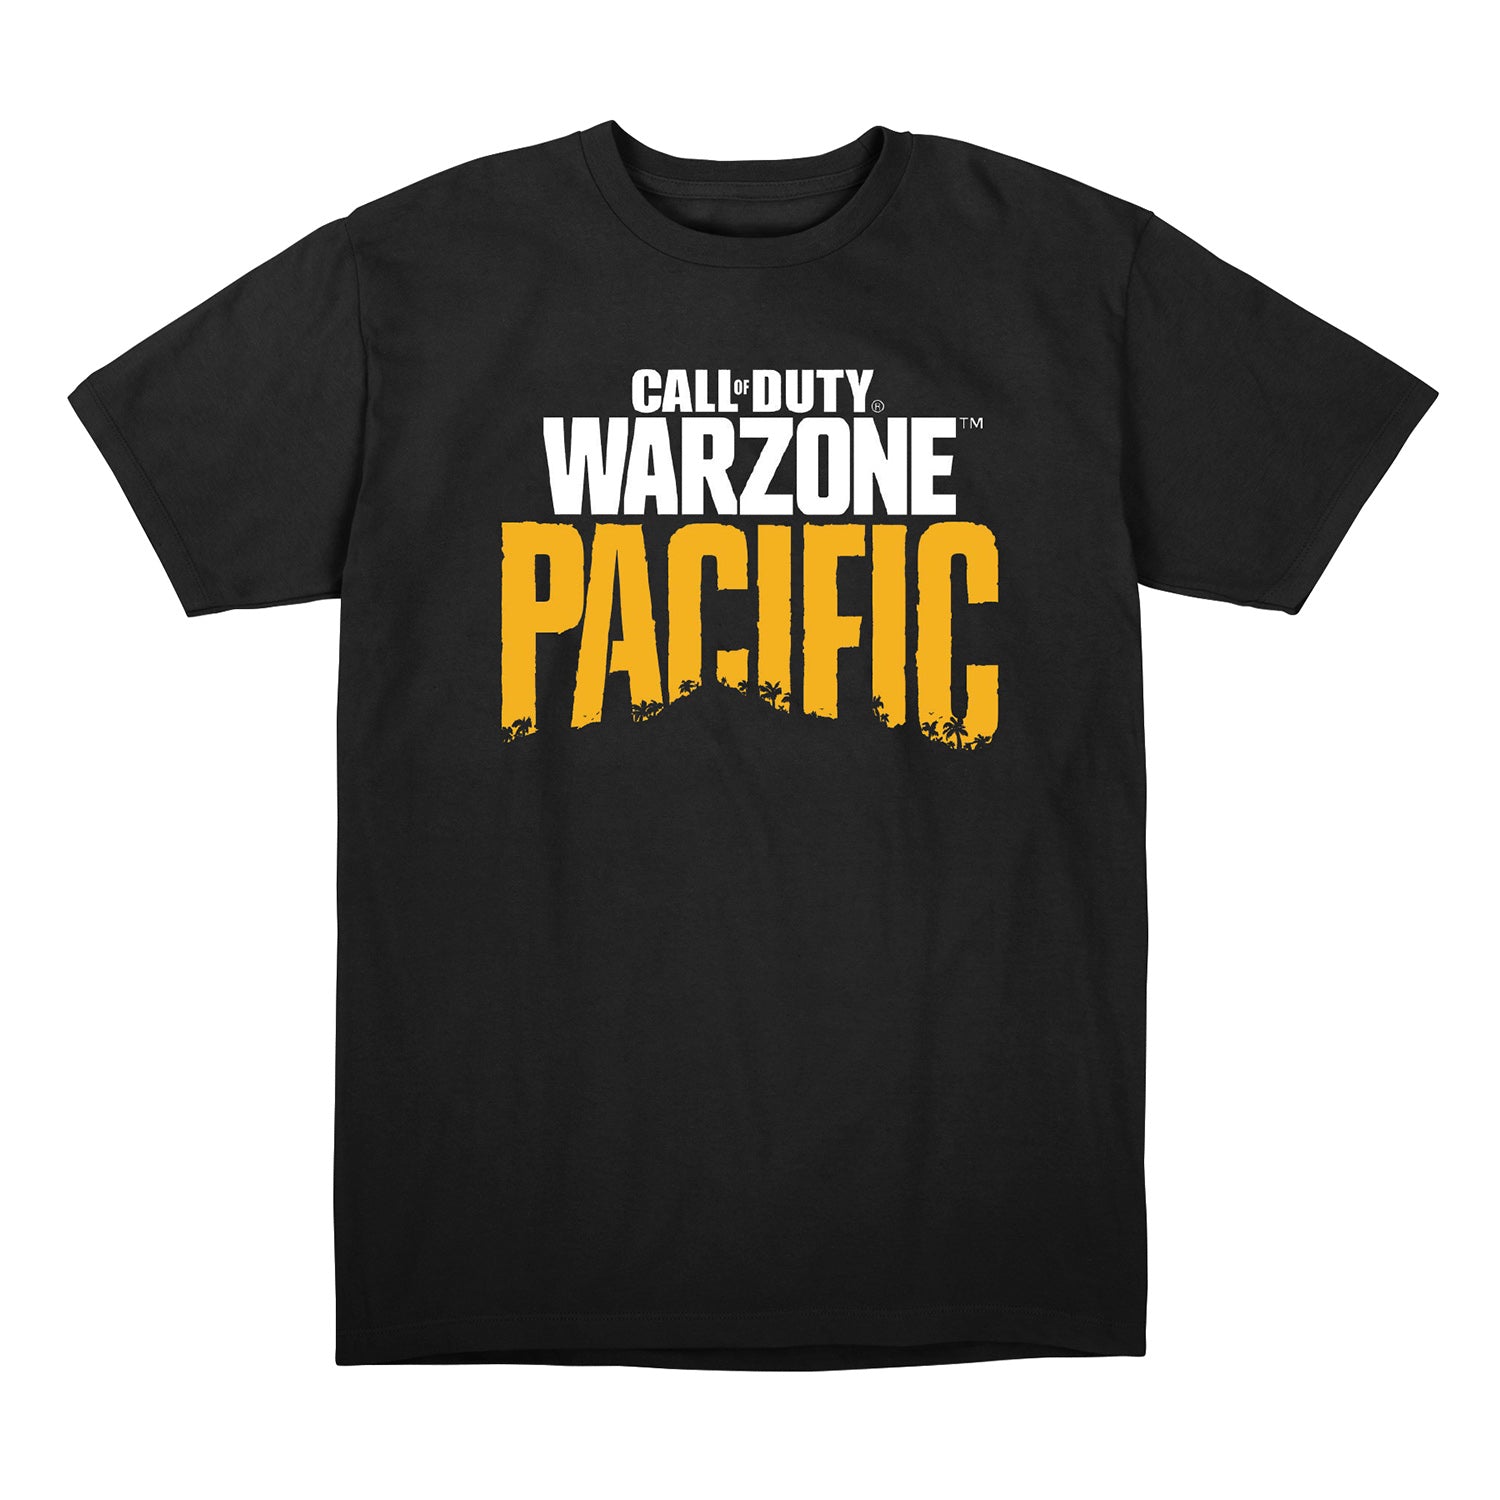 Call of Duty Black Warzone Pacific T-Shirt - Front View